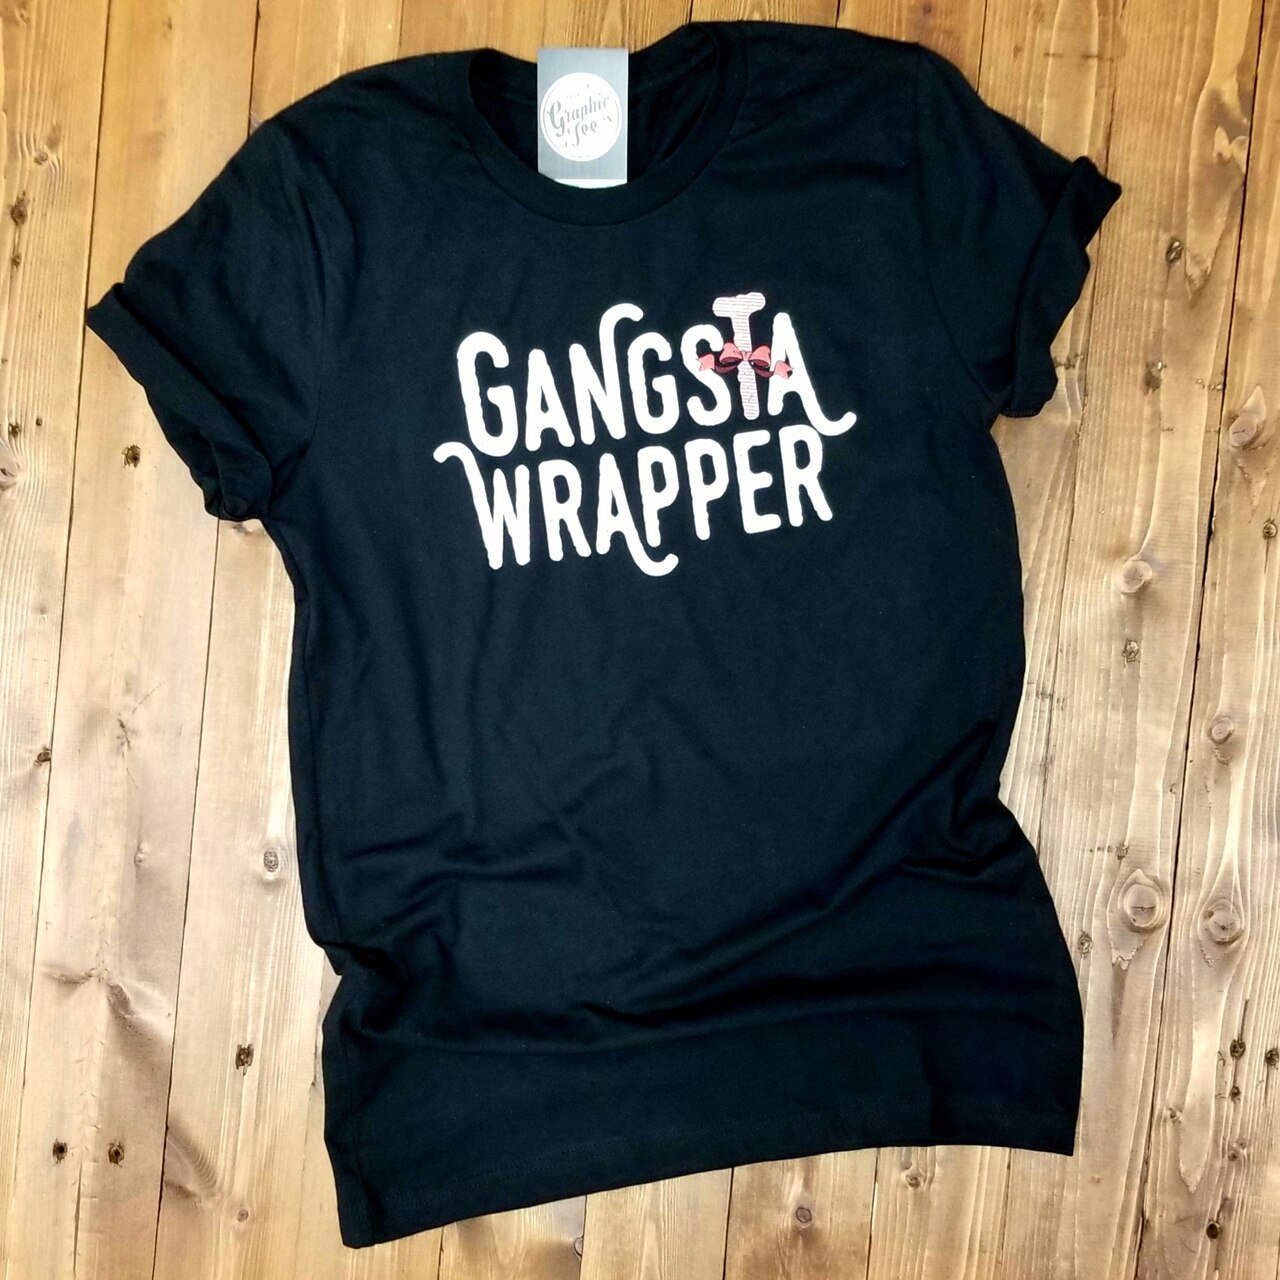 Gangsta Wrapper - Black Tee - The Graphic Tee